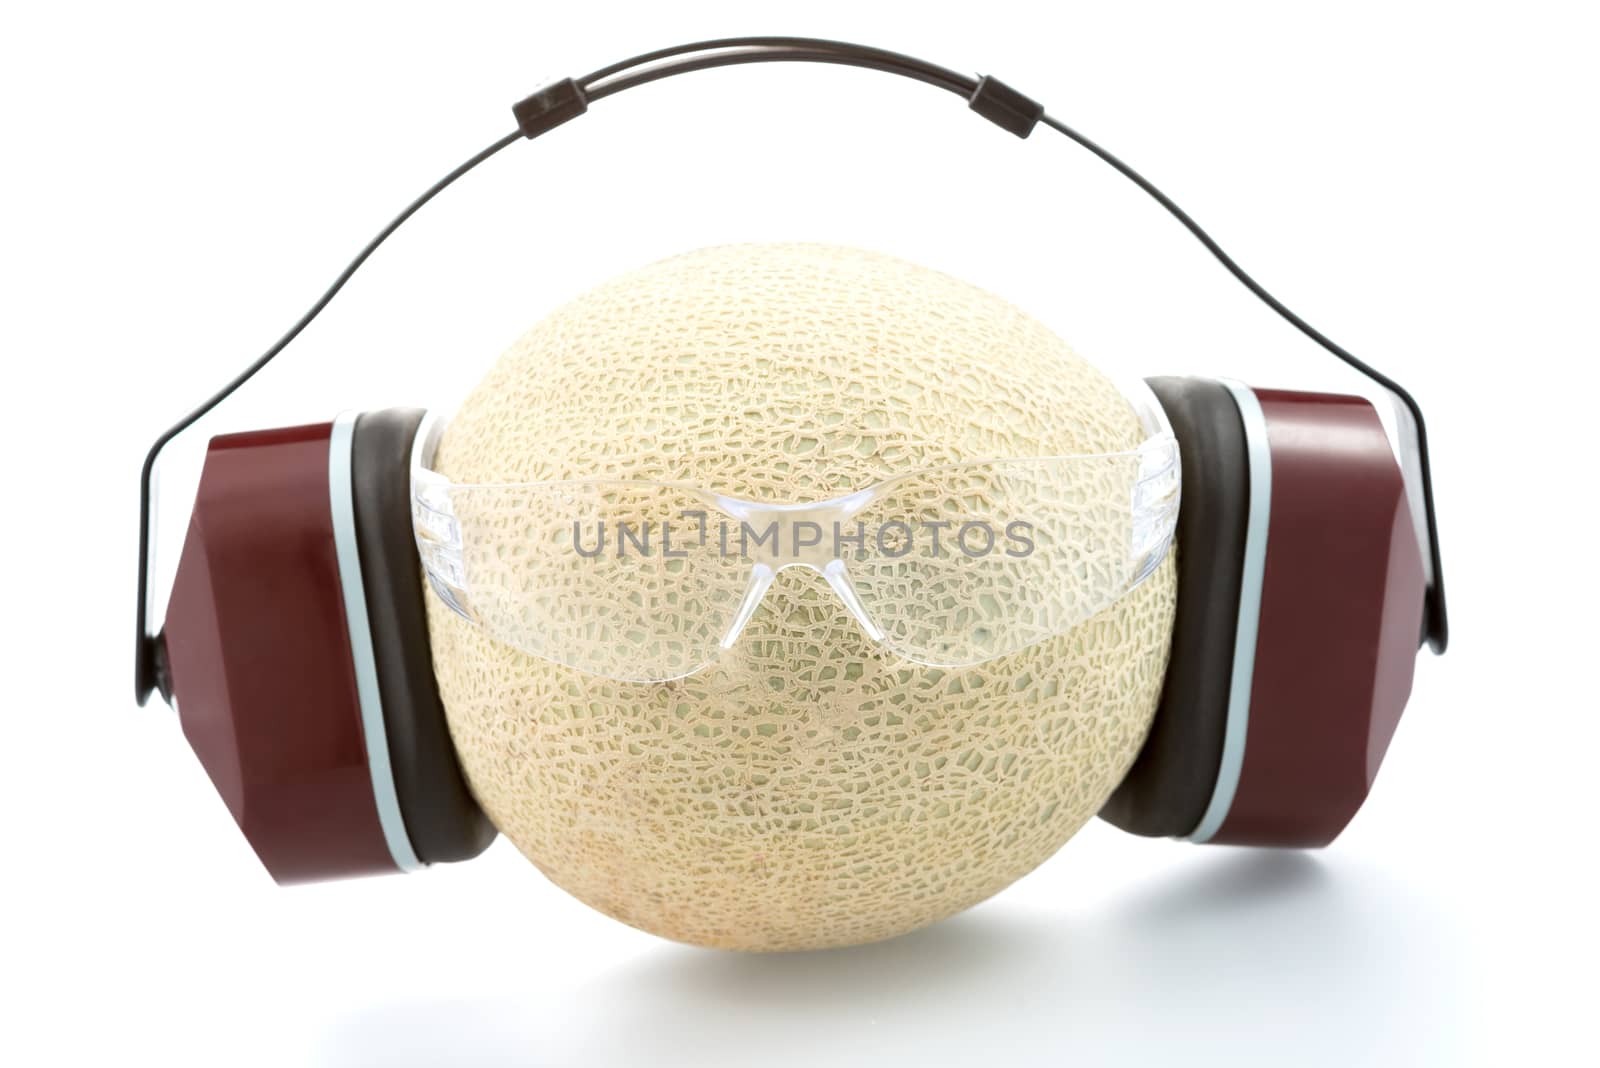 melon in headphones  and with safety glasses by Marcus